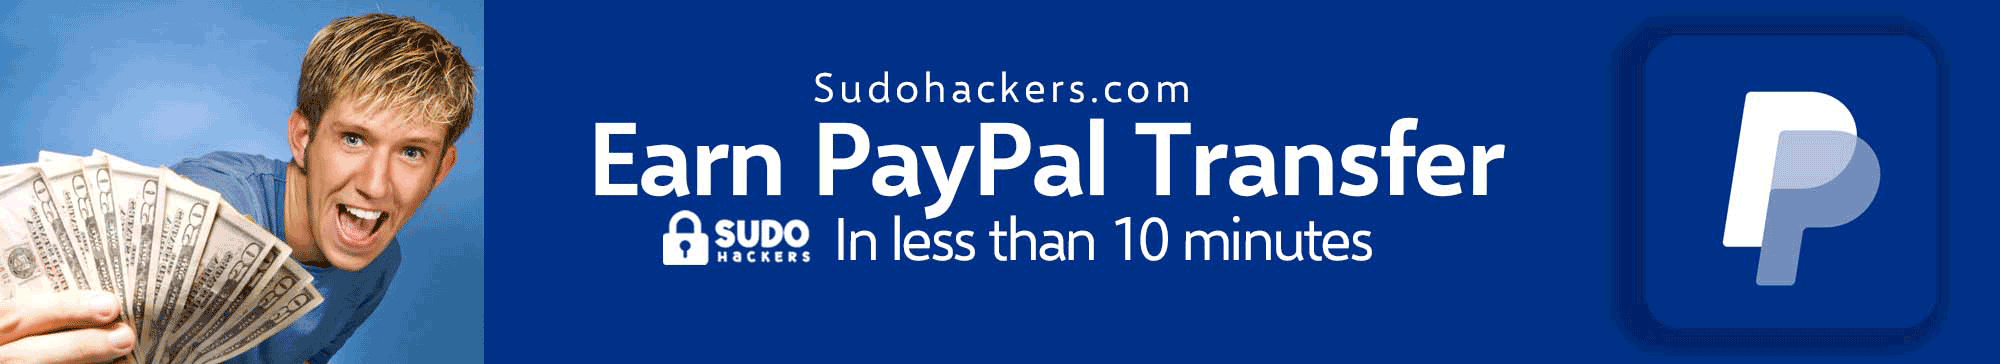 PayPal-transfer-hack-instant-flips-in-5-minutes